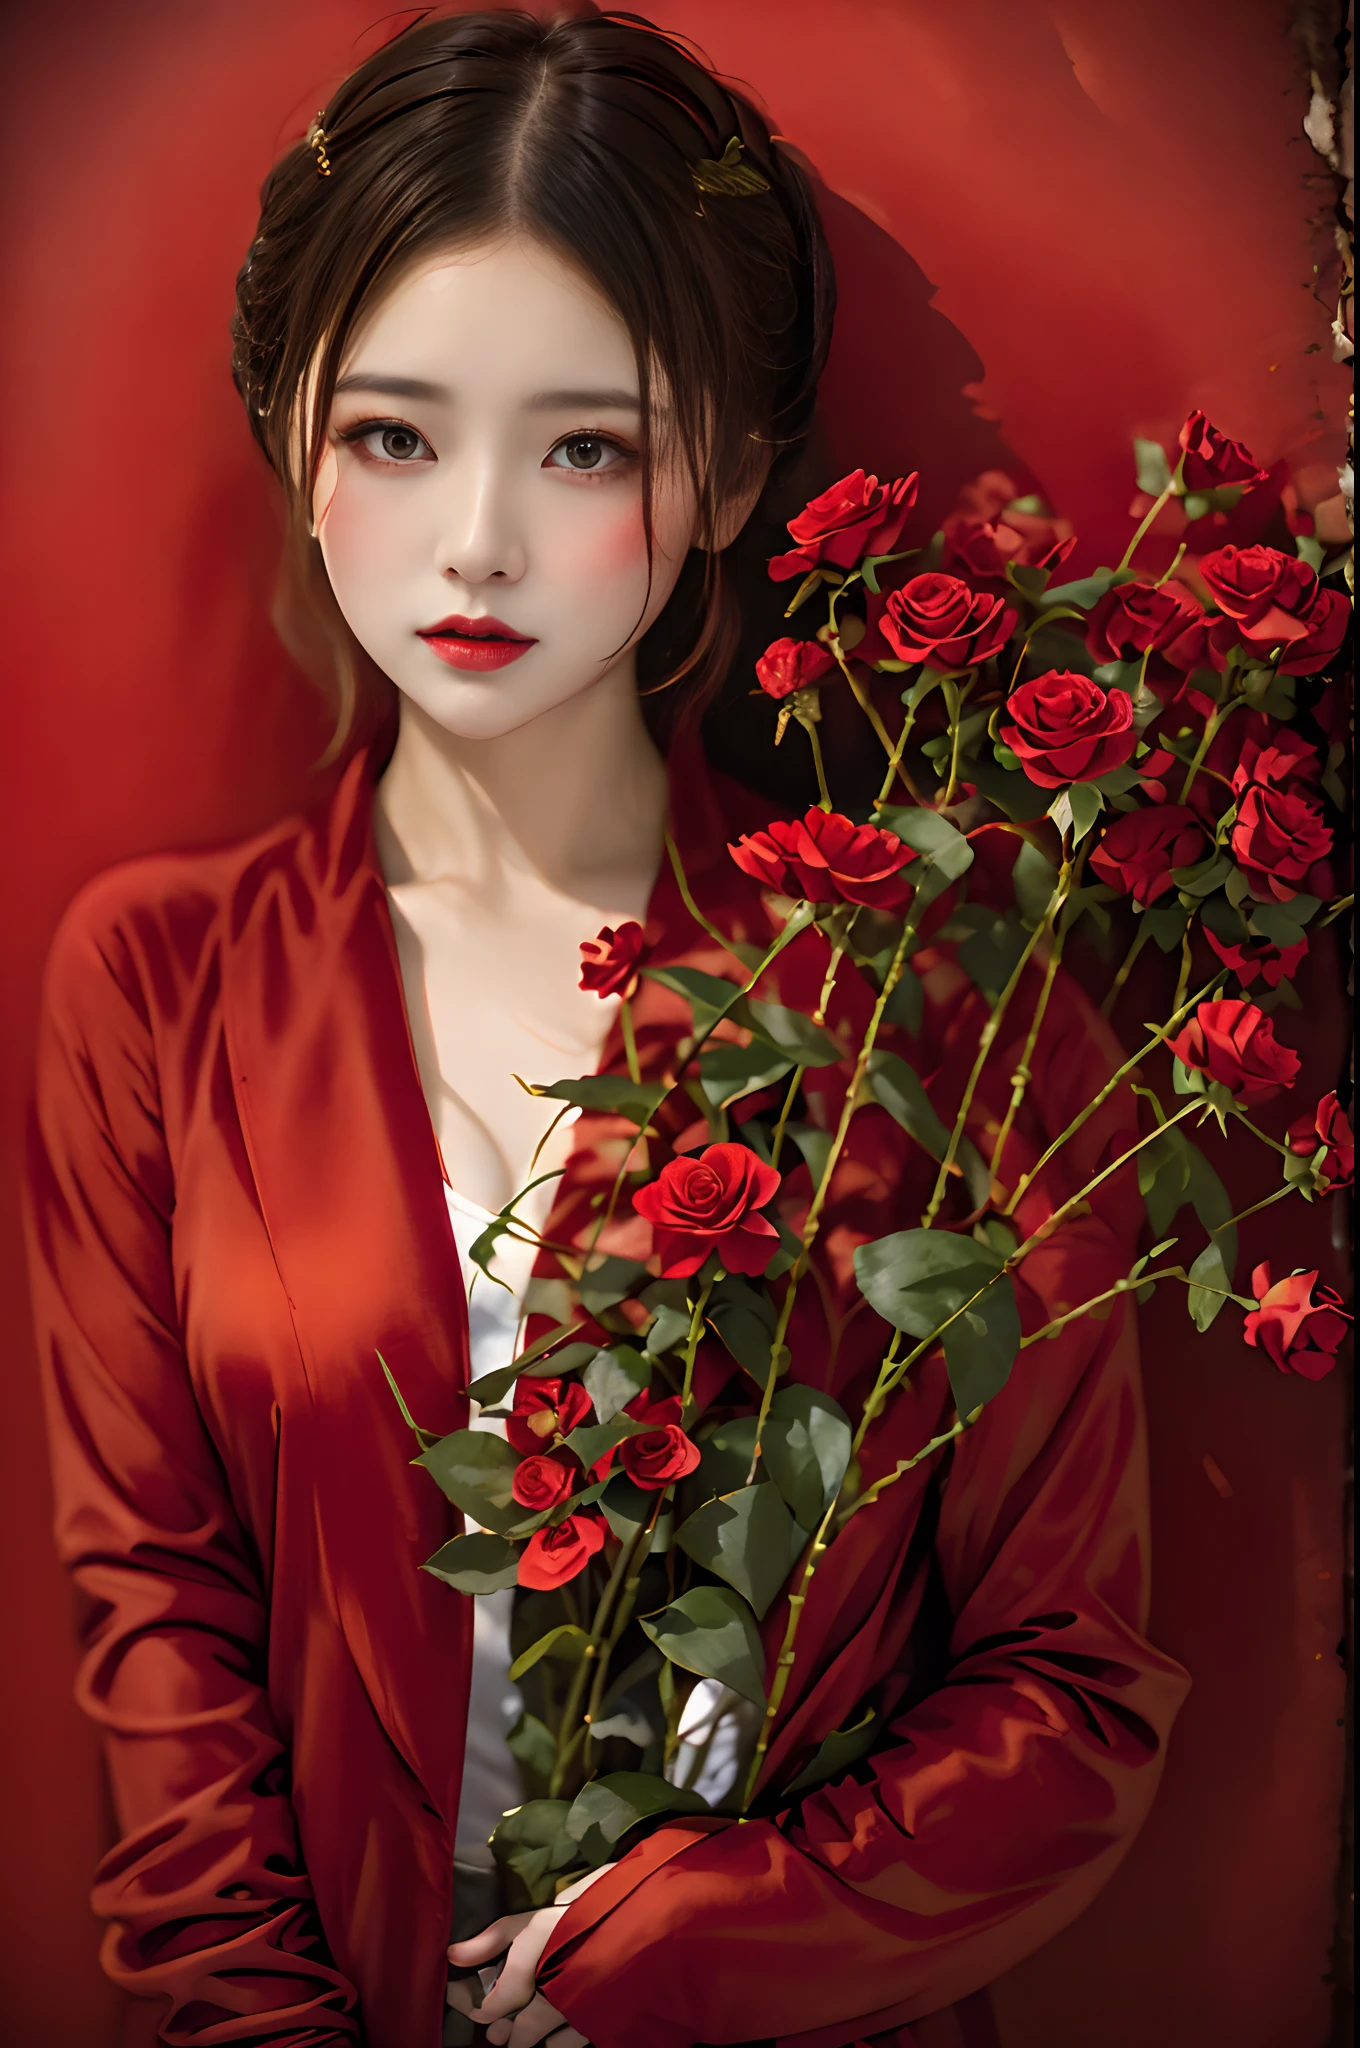 Woman in red suit holding a bouquet of flowers, Zhang Jingna, rich red color, all red, fine art fashion photography, vibrant red colors, red adornments, Shades of red, A red rose, red colored, xue han, red accent, Red clothes, Very red, Red tones, celestial red flowers vibe, wearing red